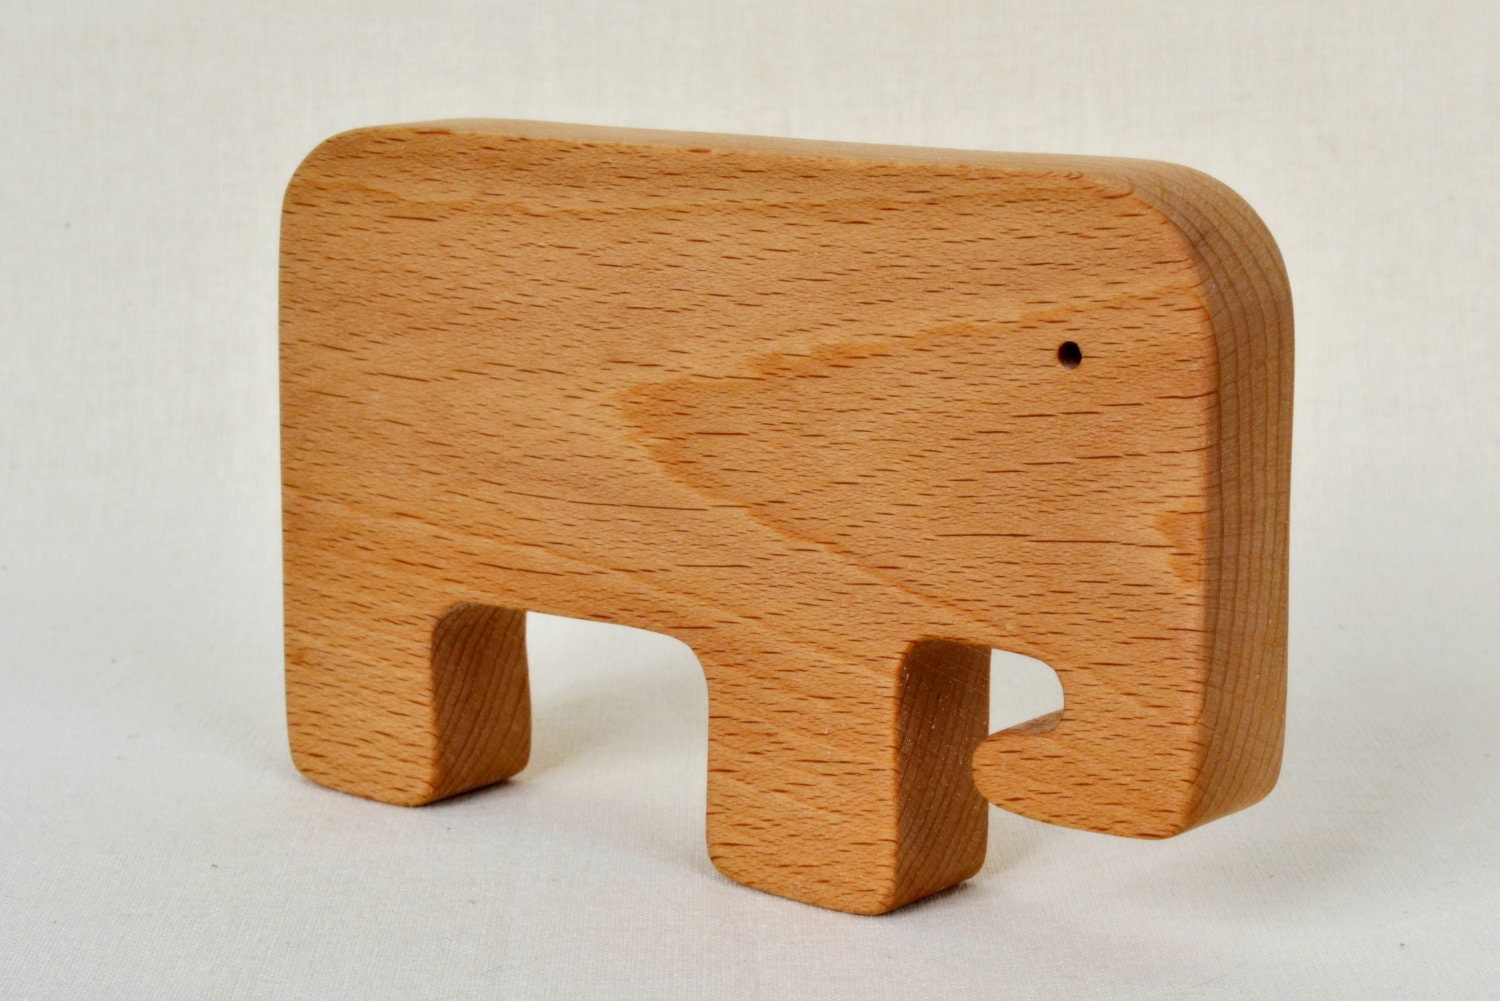 10% OFF Elephant Toy - Animal Wooden Teether - Organic Wooden Toy